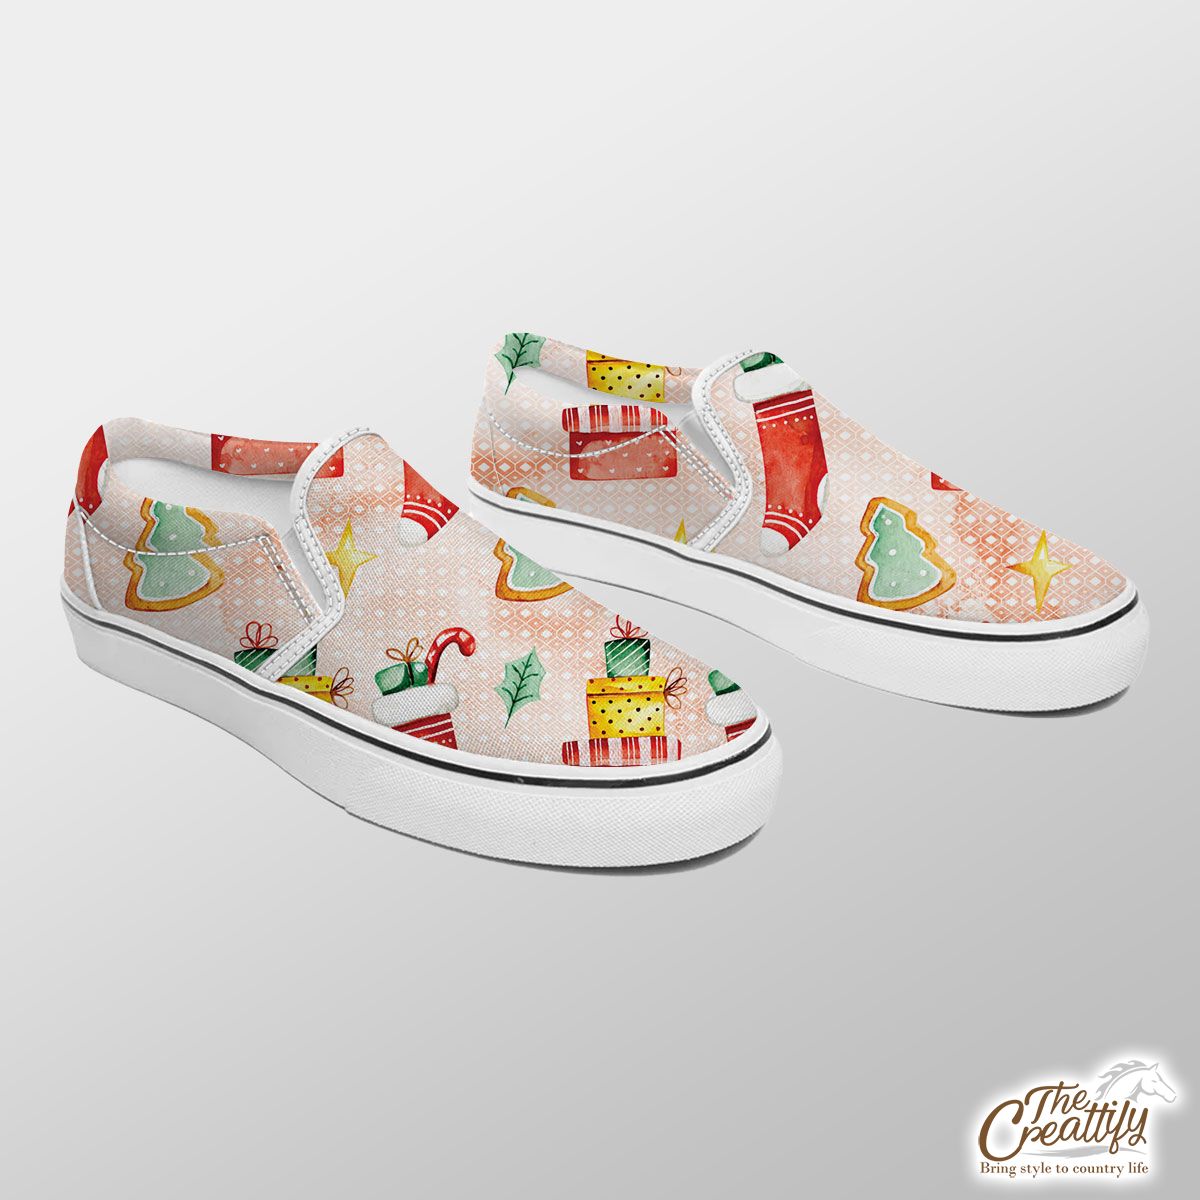 Gingerbread, Christmas Tree, Red Socks With Candy Canes Slip On Sneakers